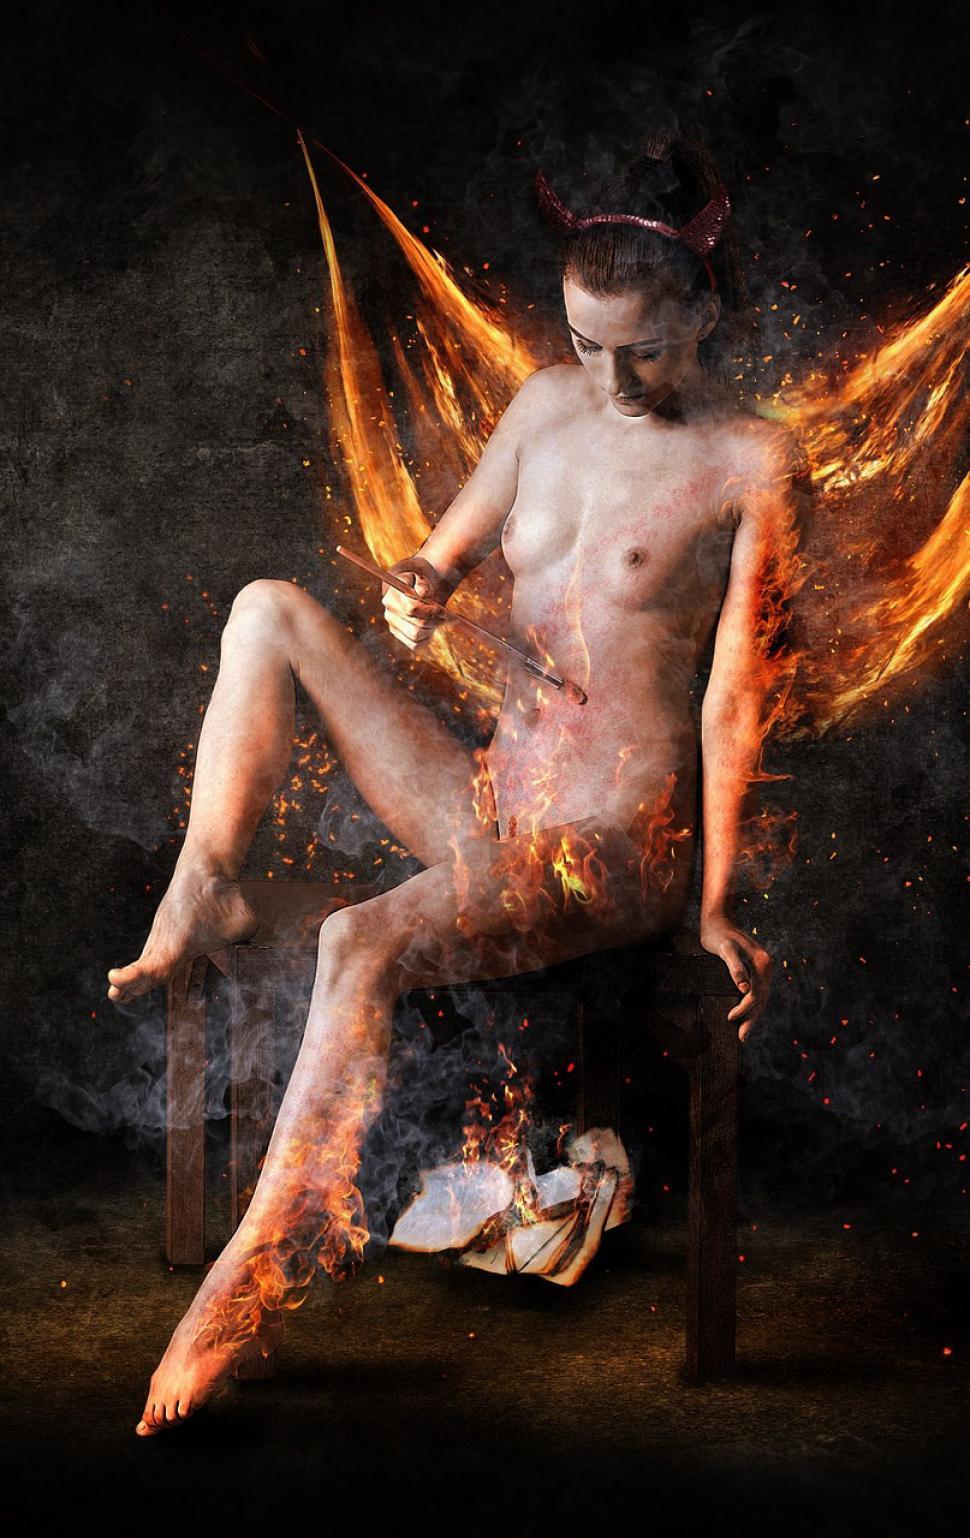 Free Image of Naked Woman Sitting on Chair Covered in Fire 